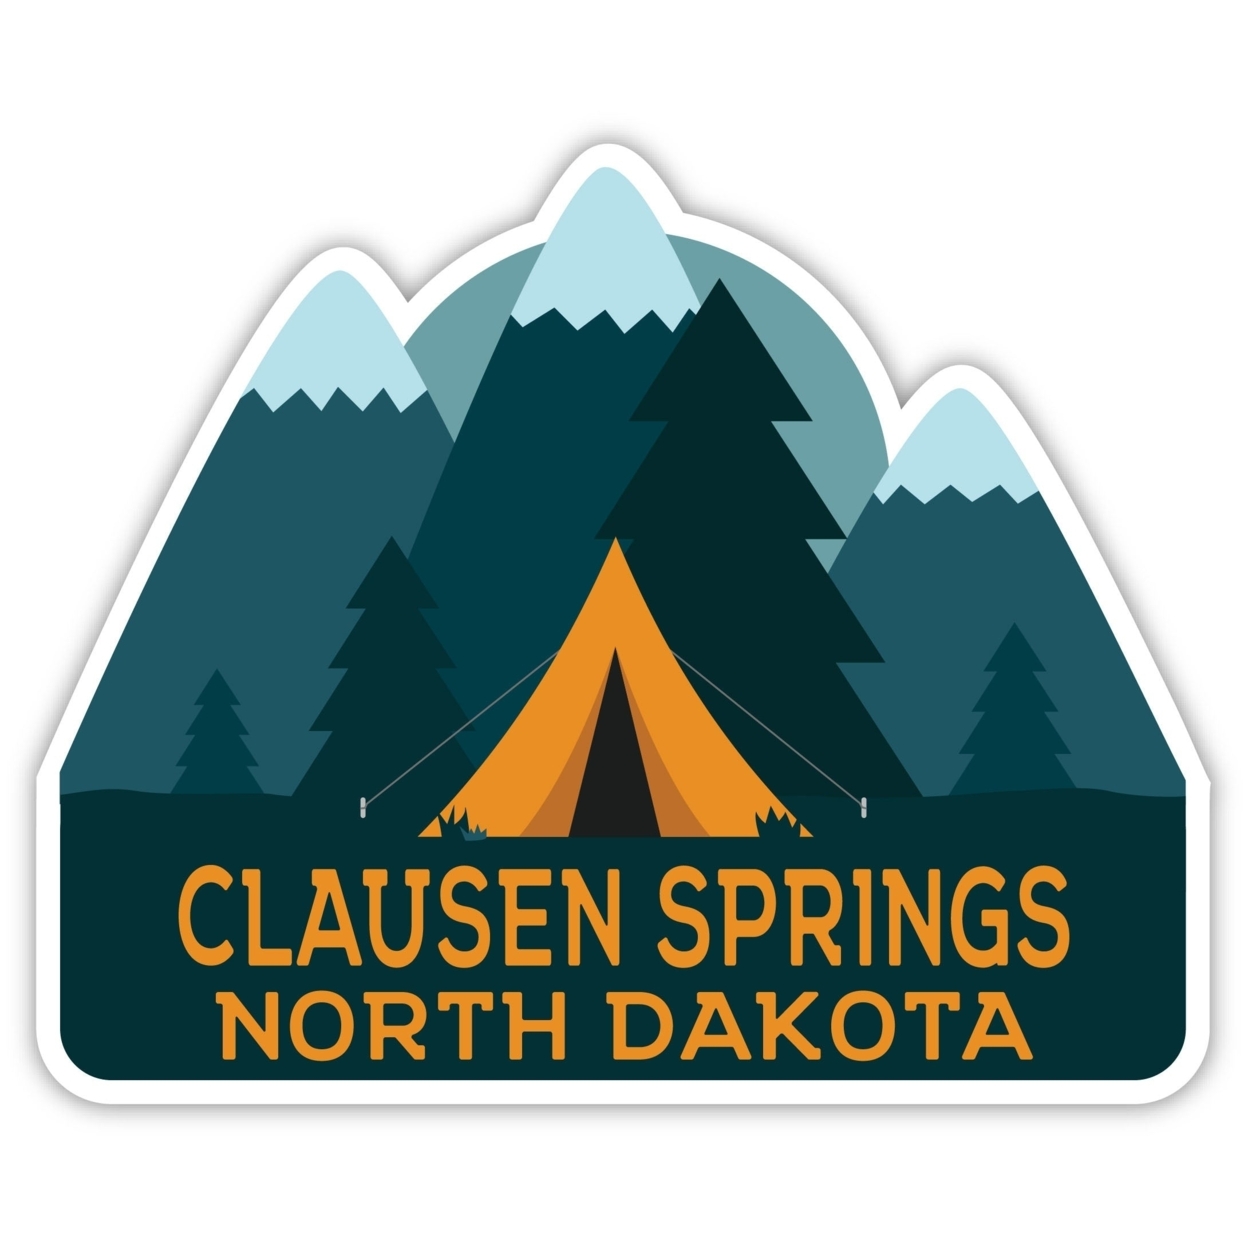 Clausen Springs North Dakota Souvenir Decorative Stickers (Choose Theme And Size) - 4-Pack, 10-Inch, Tent